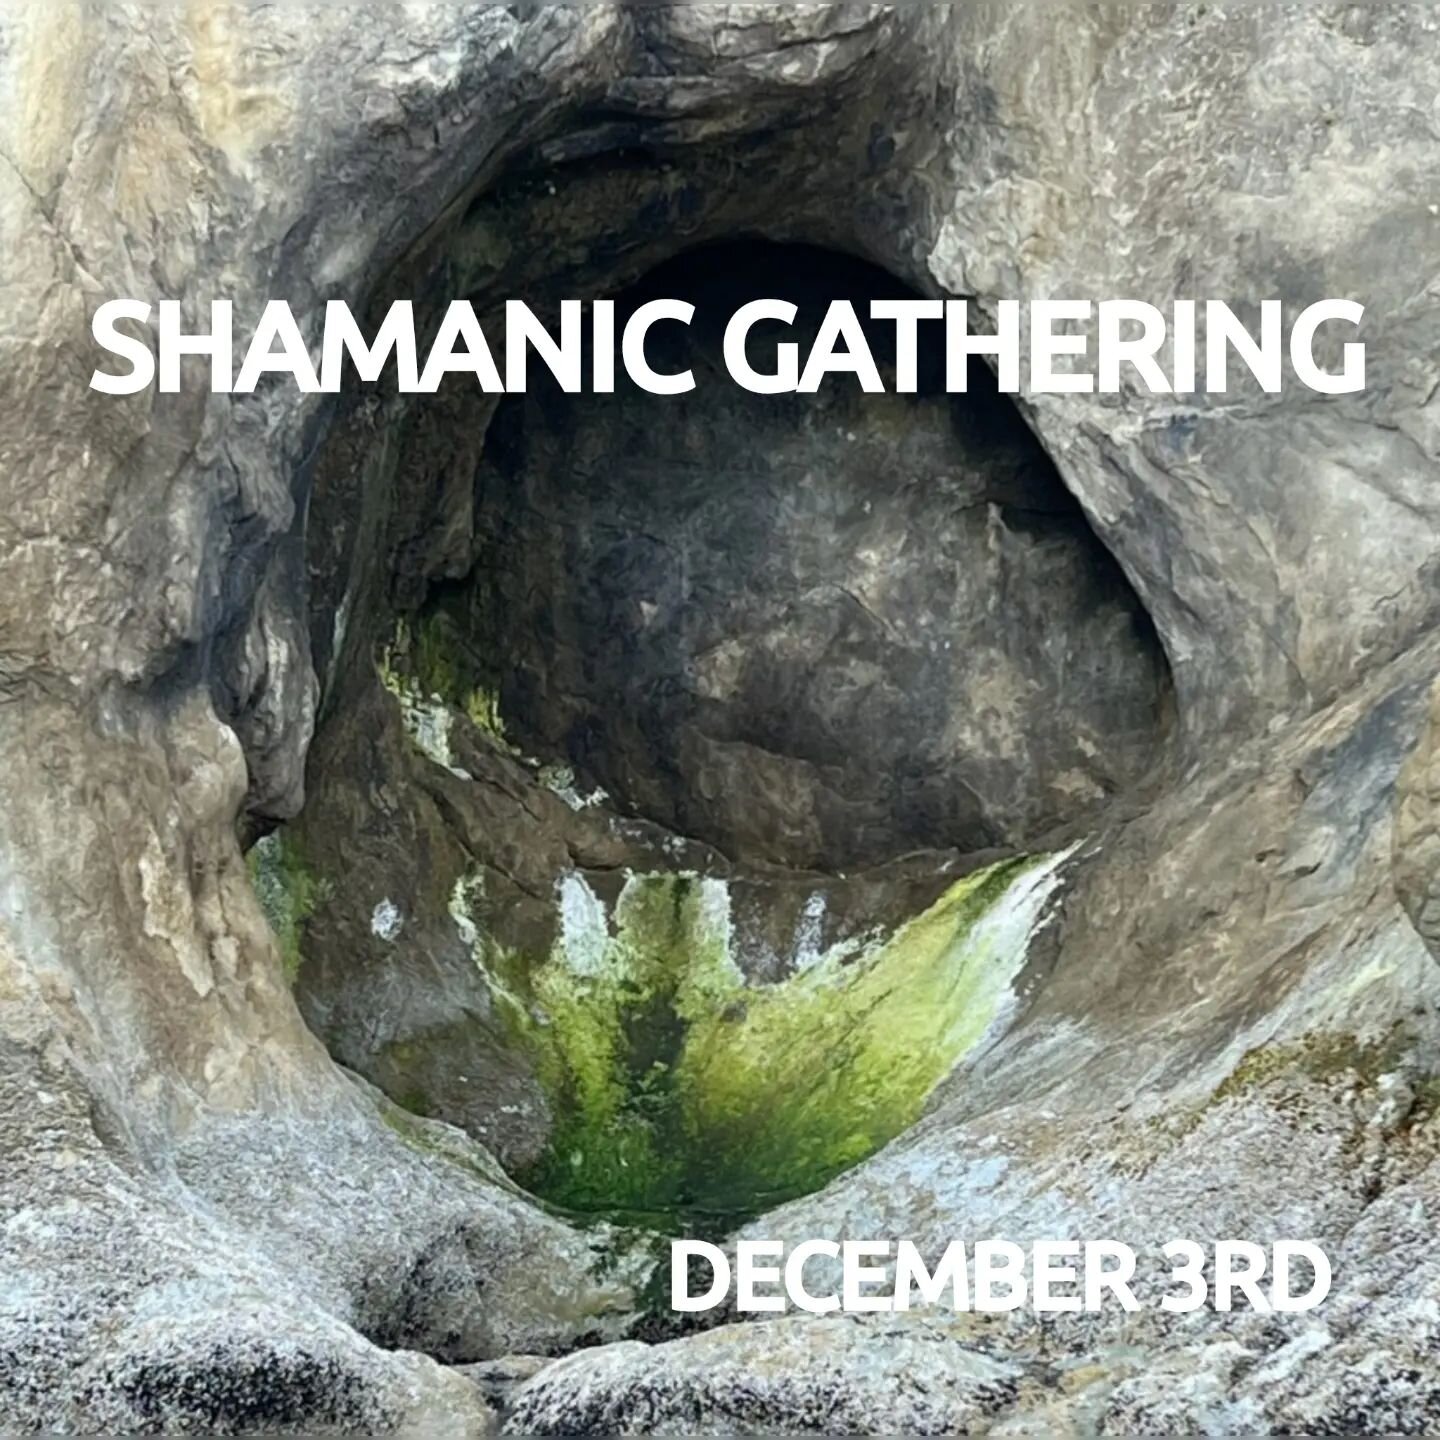 Happy Holidays! ❤️ 

Join us as we come together in creating a heart-opening space for love, gratitude, and healing.

On Saturday December 3rd, I am holding a special in-person Shamanic Gathering. Space is limited so please RSVP. The gathering will a